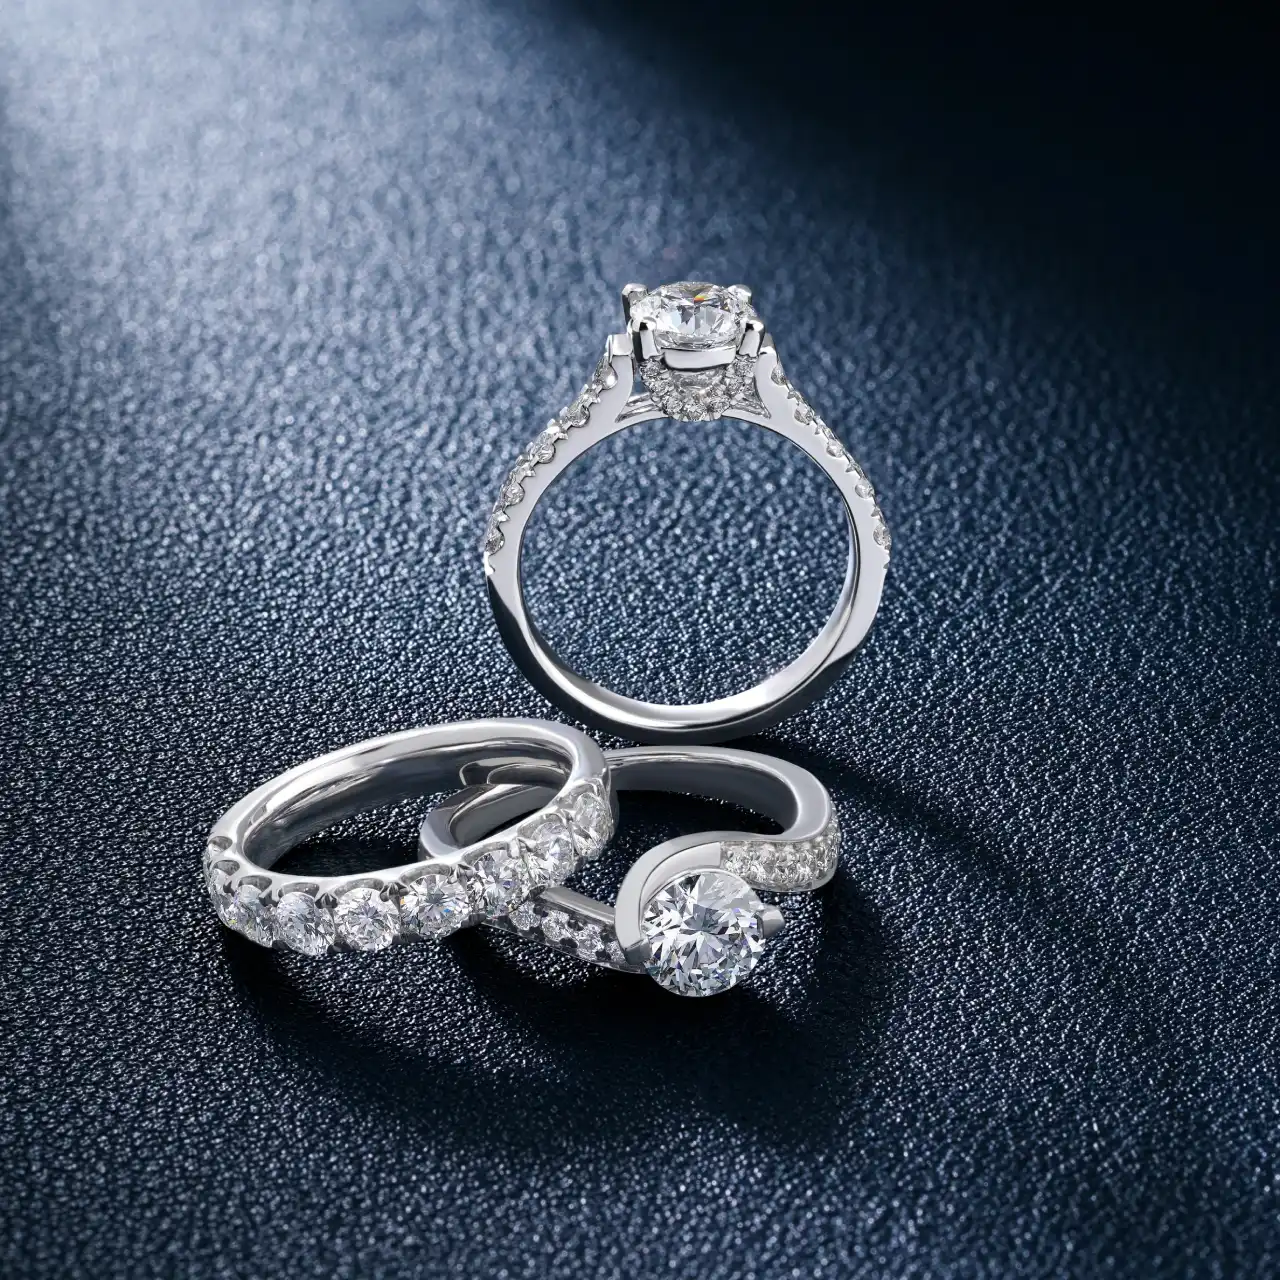 A&1 Jewelry - Engagement Rings & Wedding Band with Diamonds